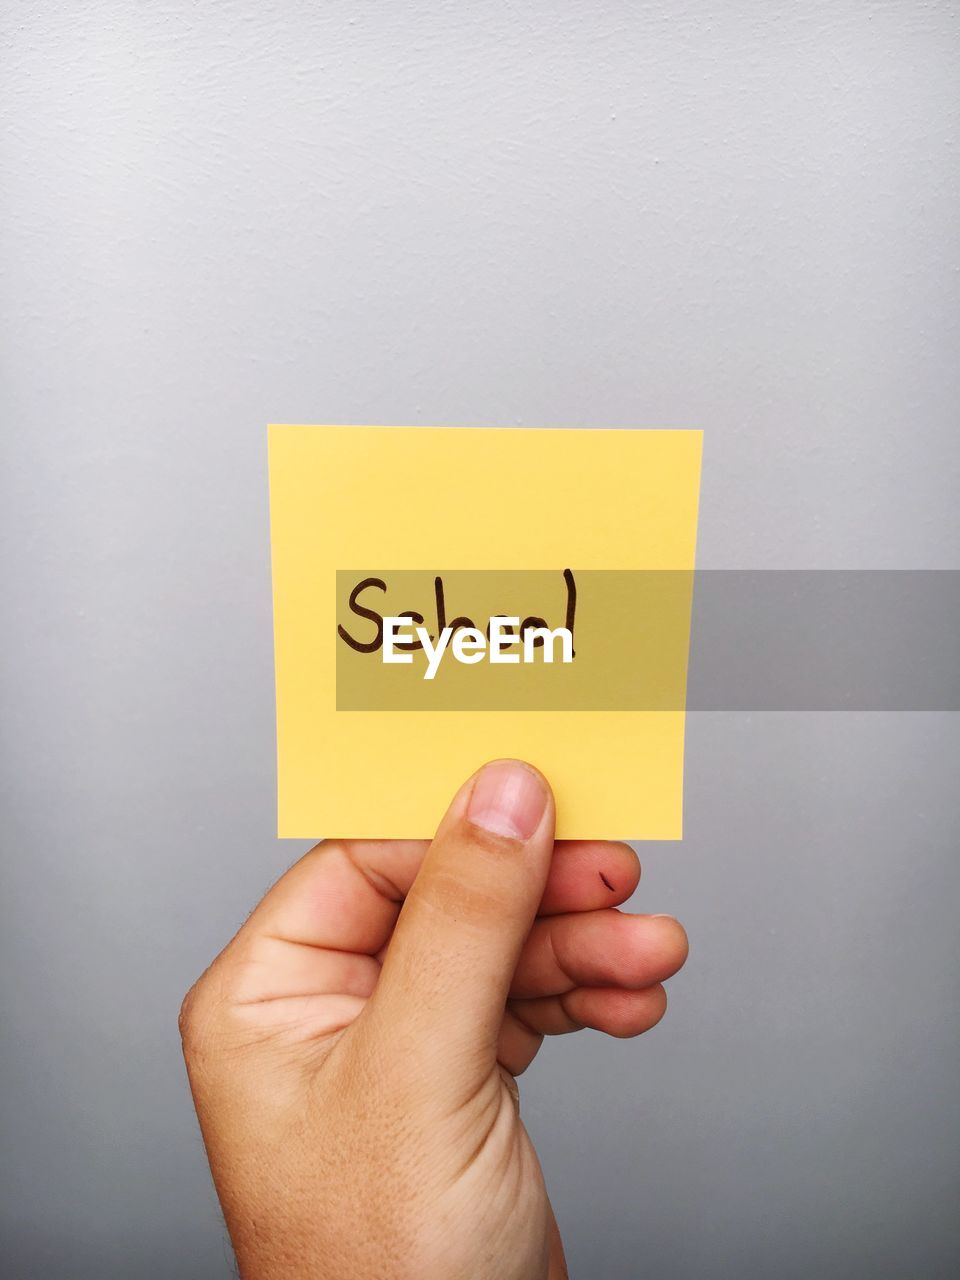 Cropped hand of person holding school text on adhesive note against gray background